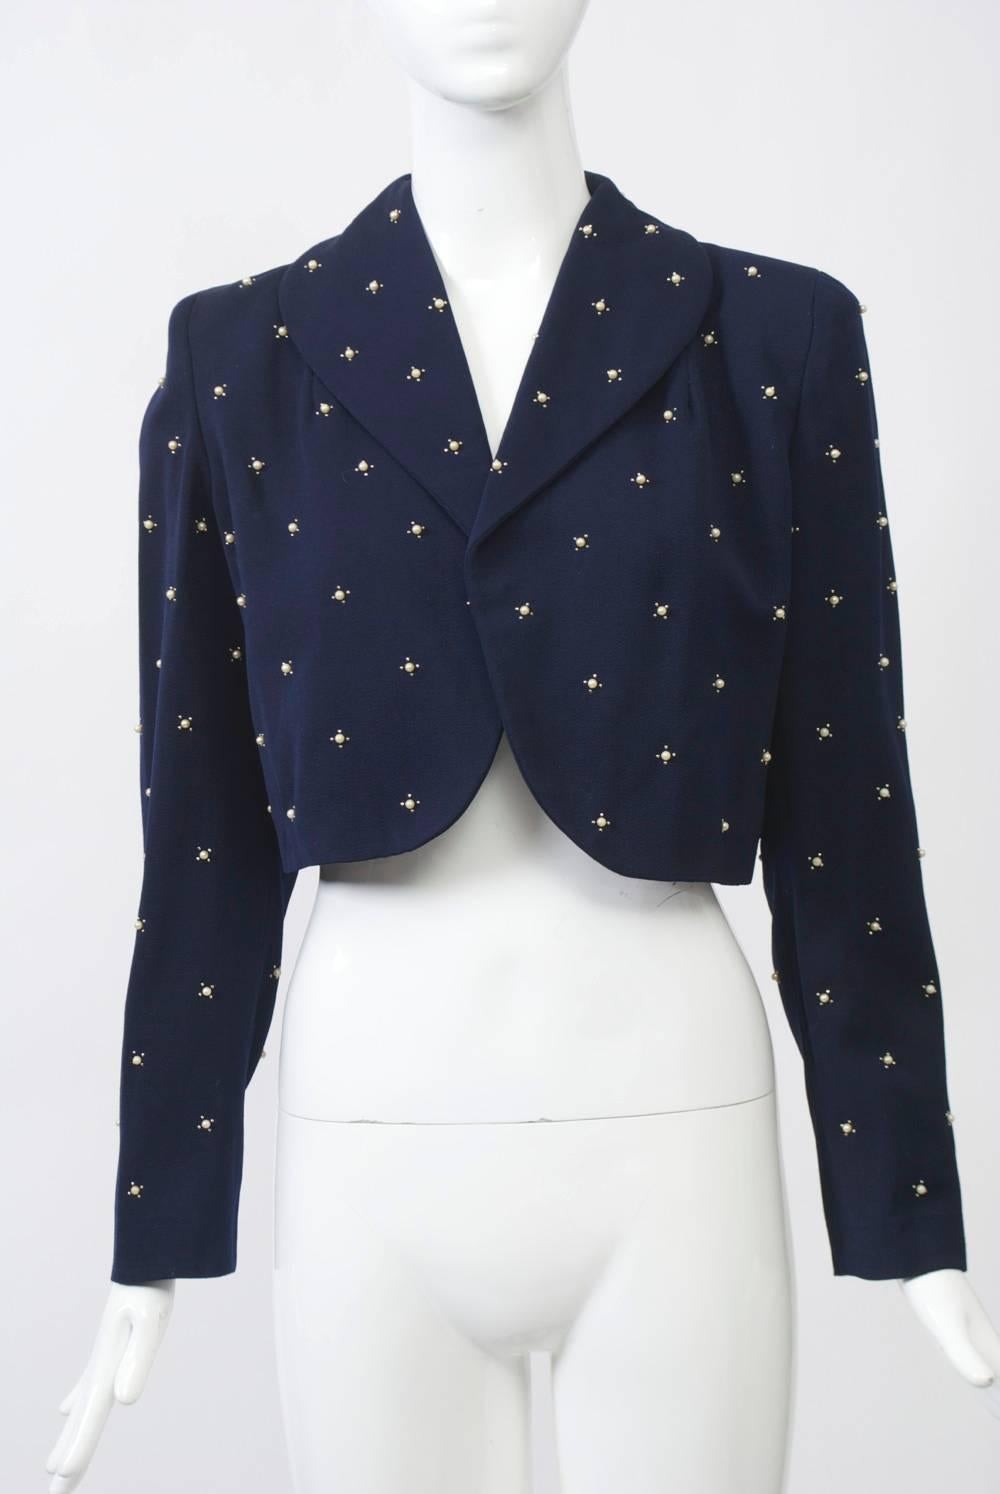 1950s Cropped Jacket with Pearl Studs In Excellent Condition For Sale In Alford, MA